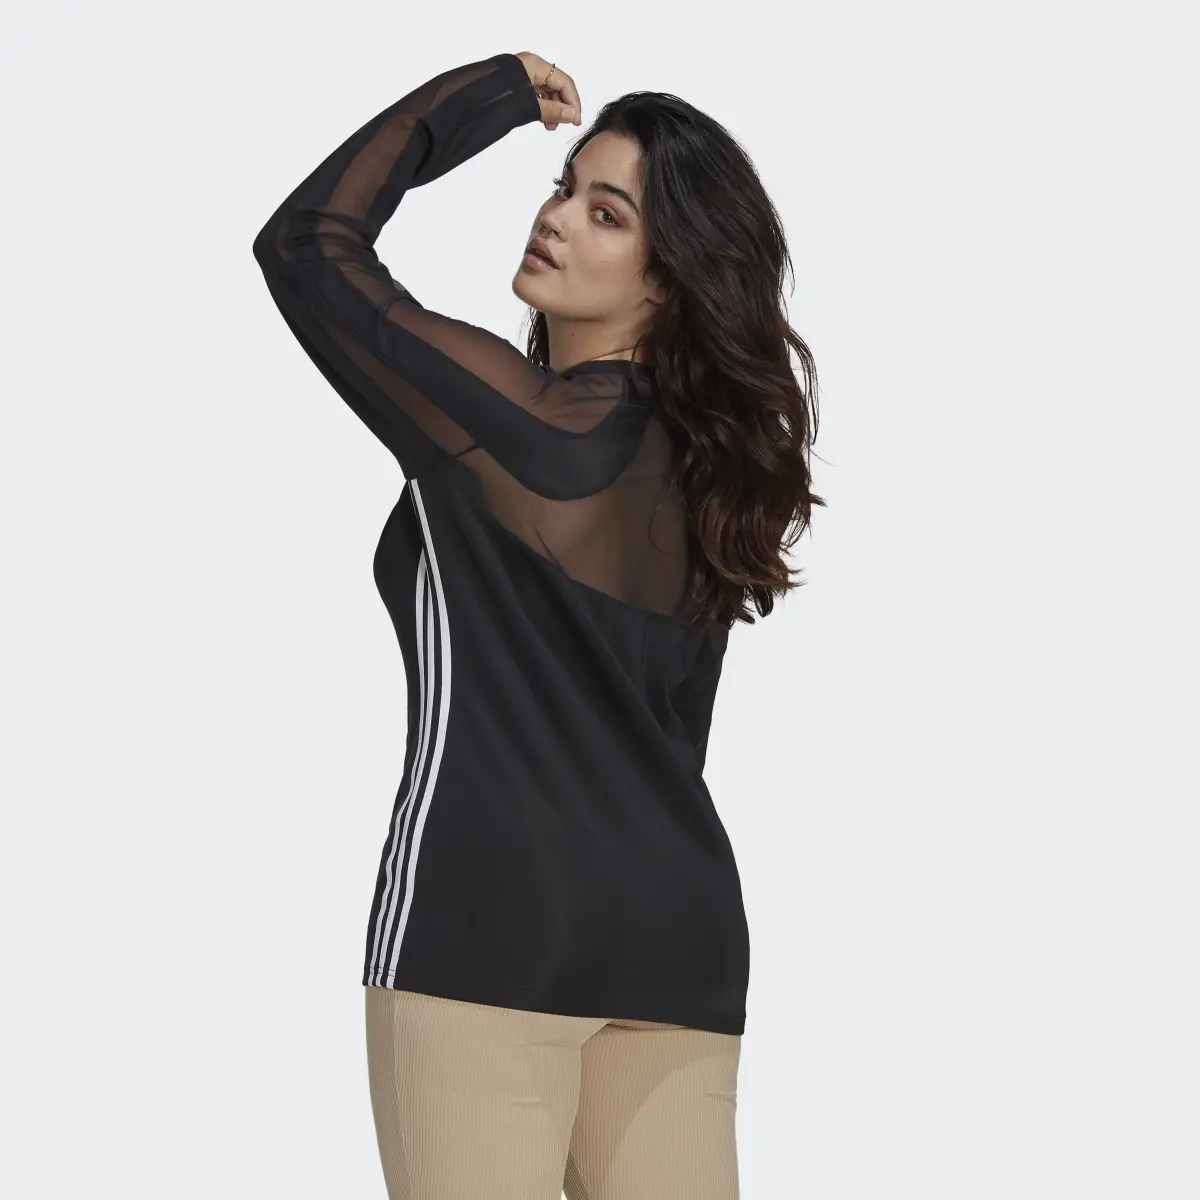 Adidas Centre Stage Mesh Top (Plus Size). 3